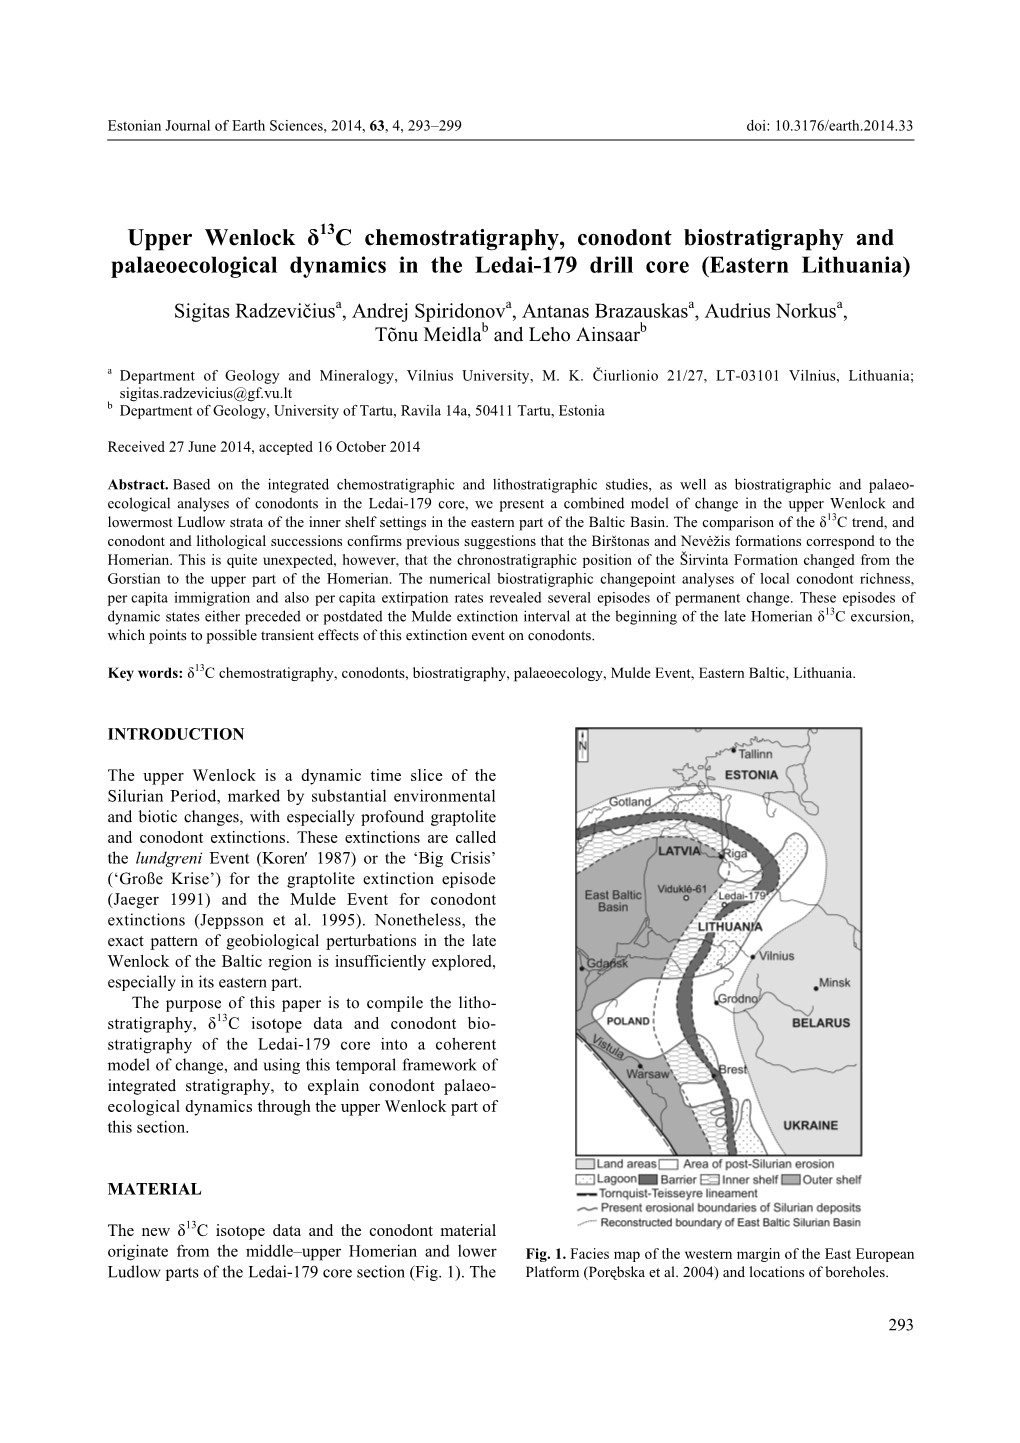 Upper Wenlock Δ13c Chemostratigraphy, Conodont Biostratigraphy and Palaeoecological Dynamics in the Ledai-179 Drill Core (Eastern Lithuania)